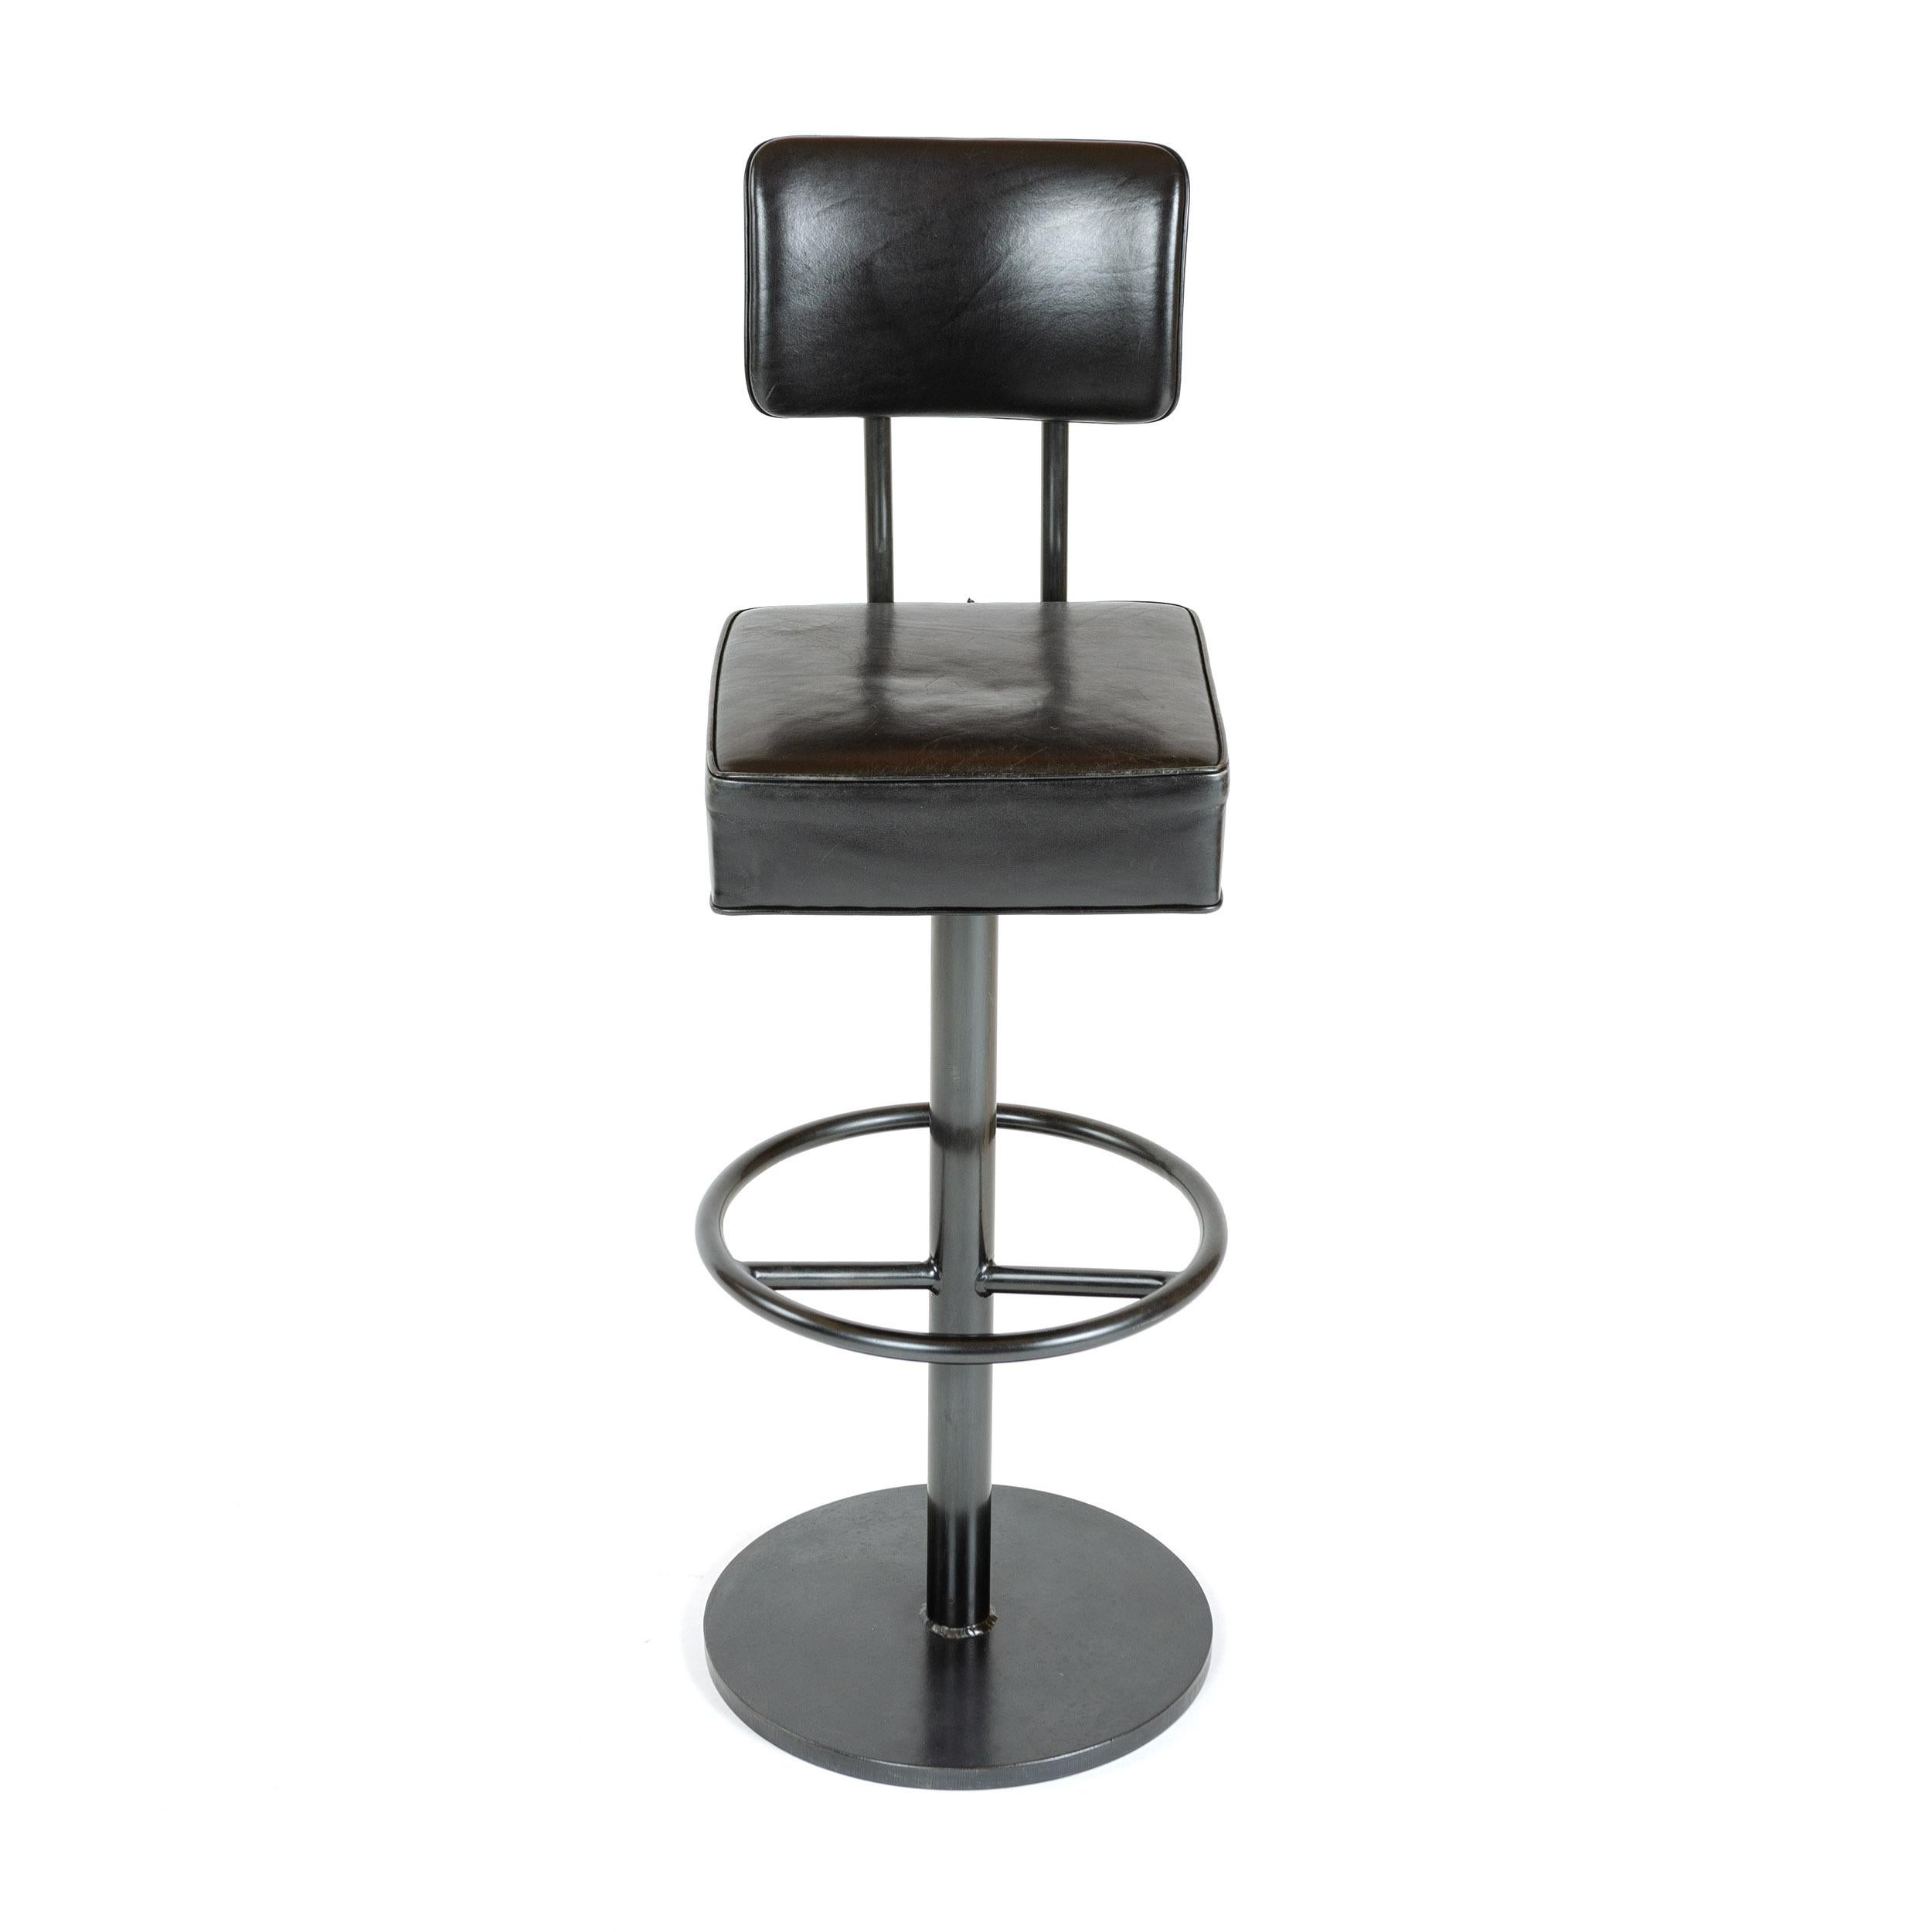 A custom height stool with upholstered seat and back on a patinated steel disc base.
          